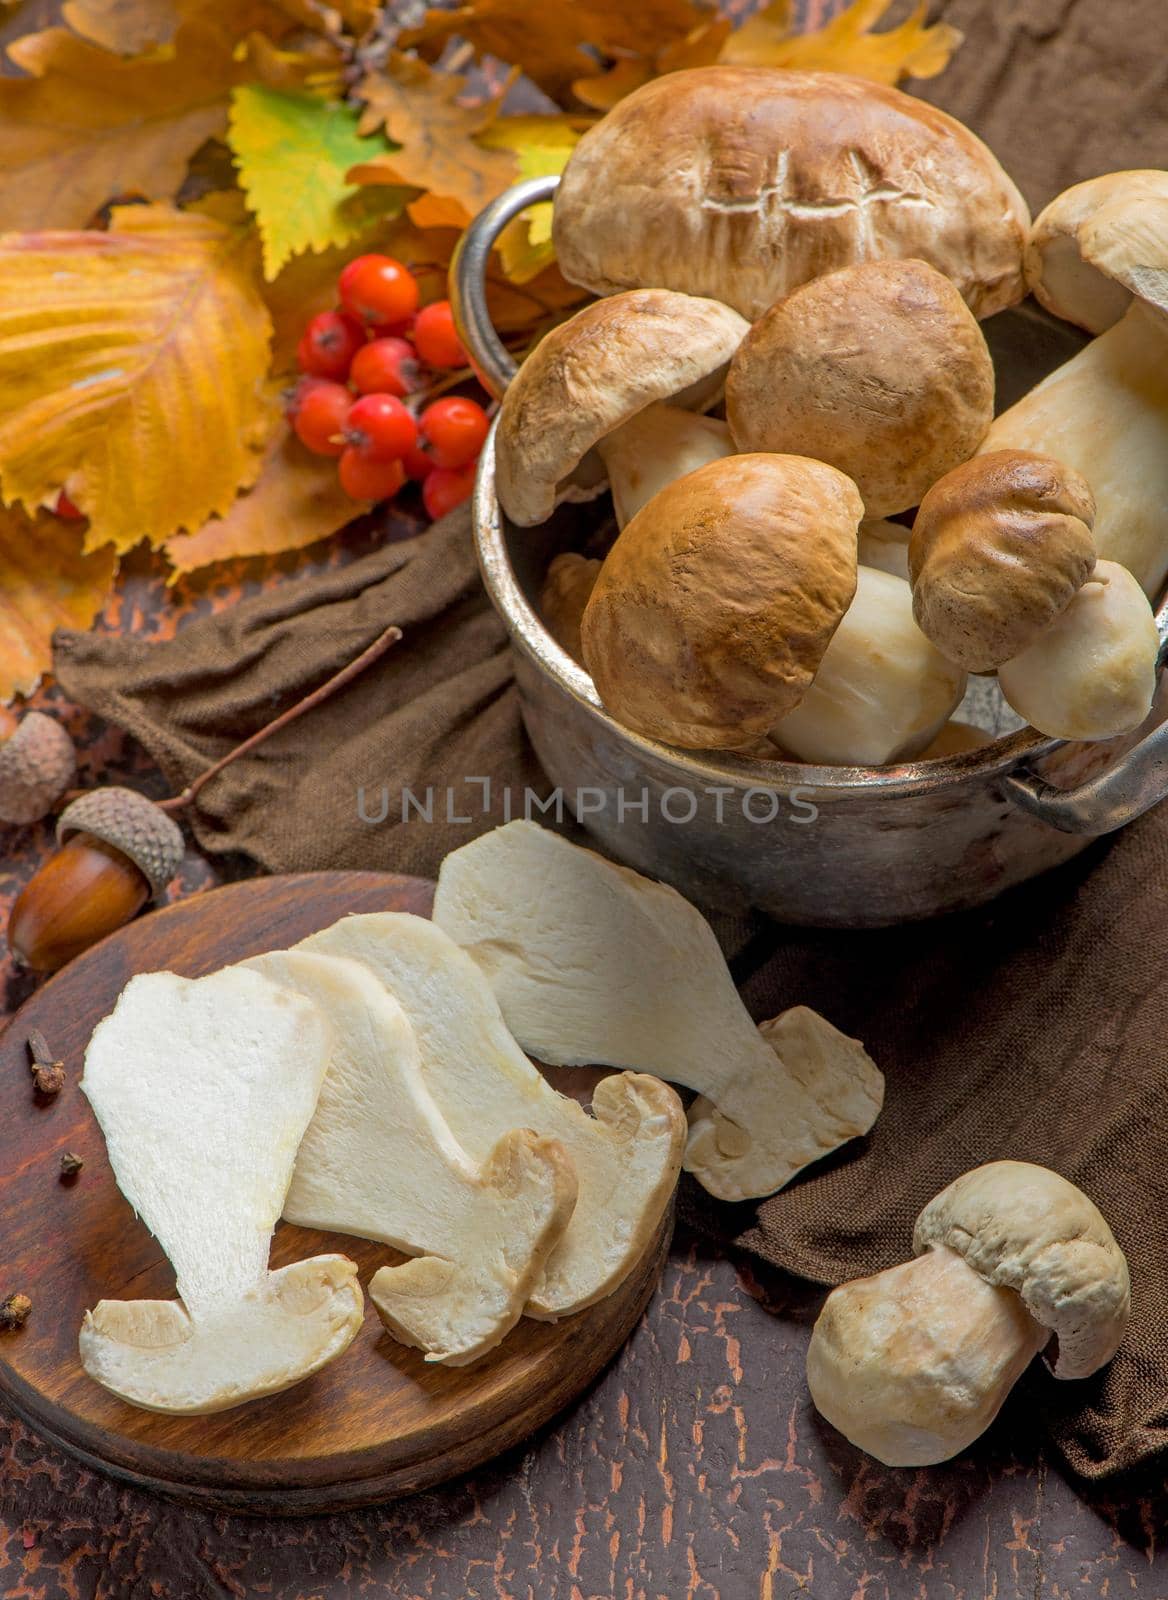 Mushroom Boletus edulis over Wooden Background, close up on wood rustic table. Cooking delicious organic mushroom. Gourmet food by aprilphoto